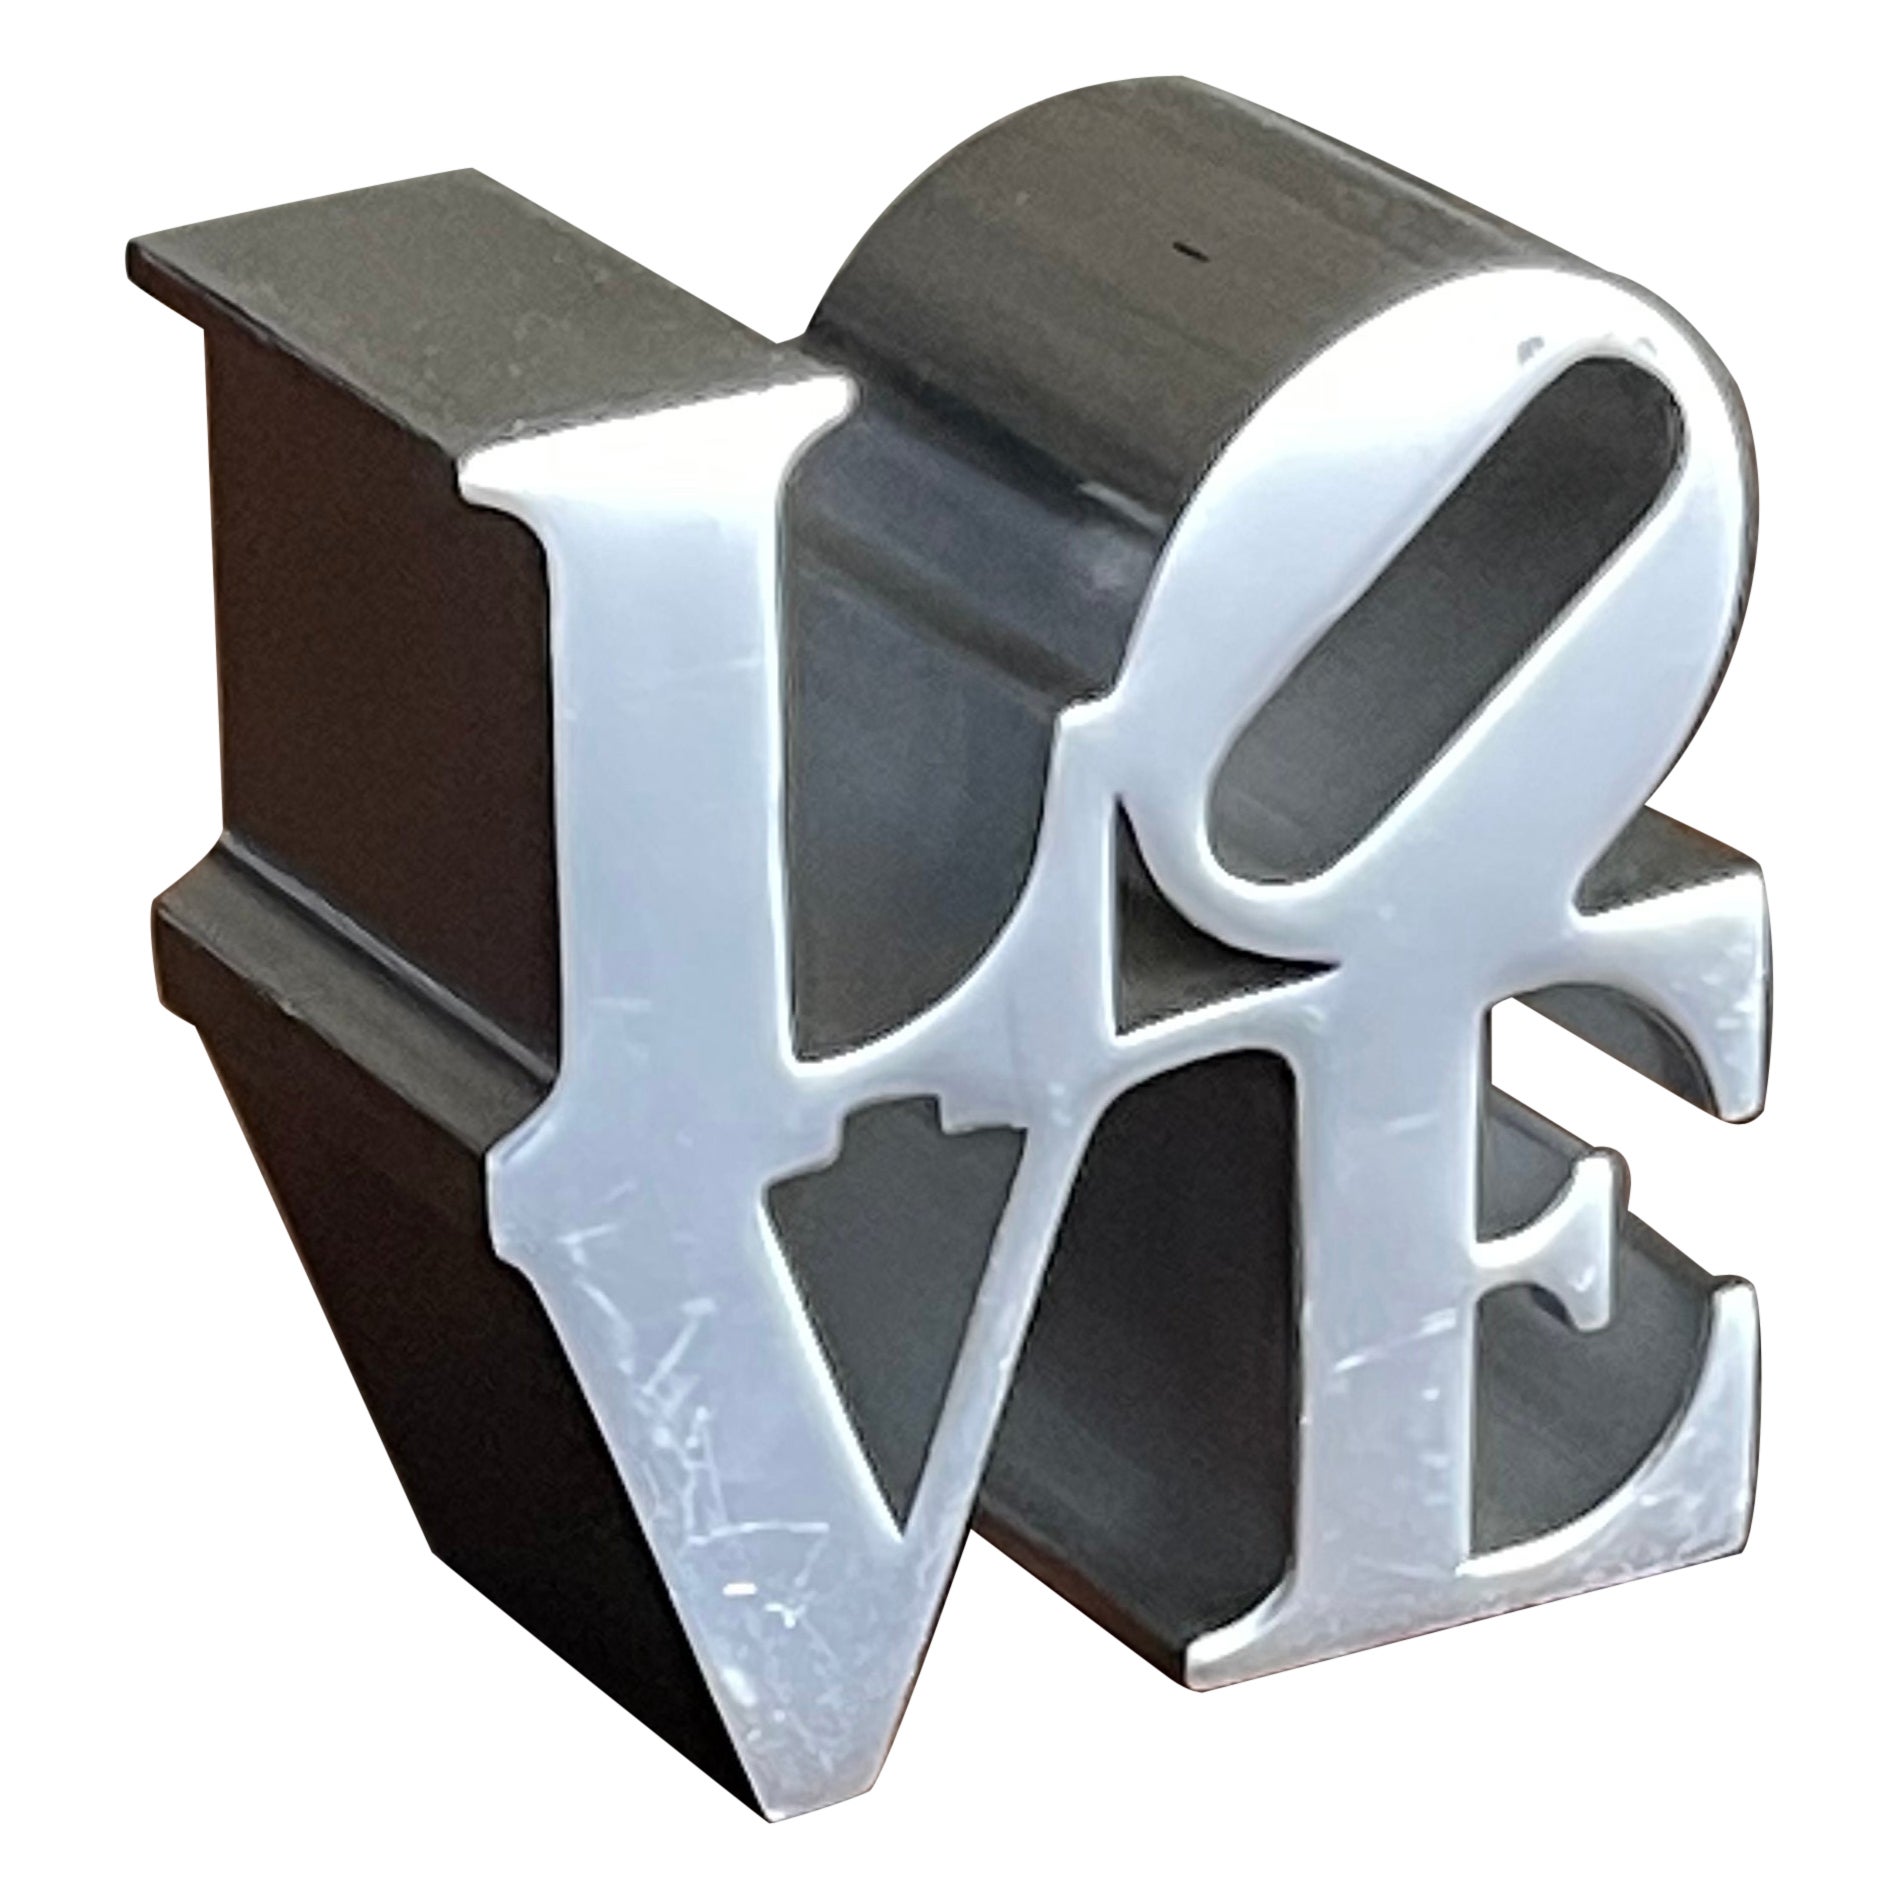 Robert Indiana Style Love Paperweight or Small Sculpture